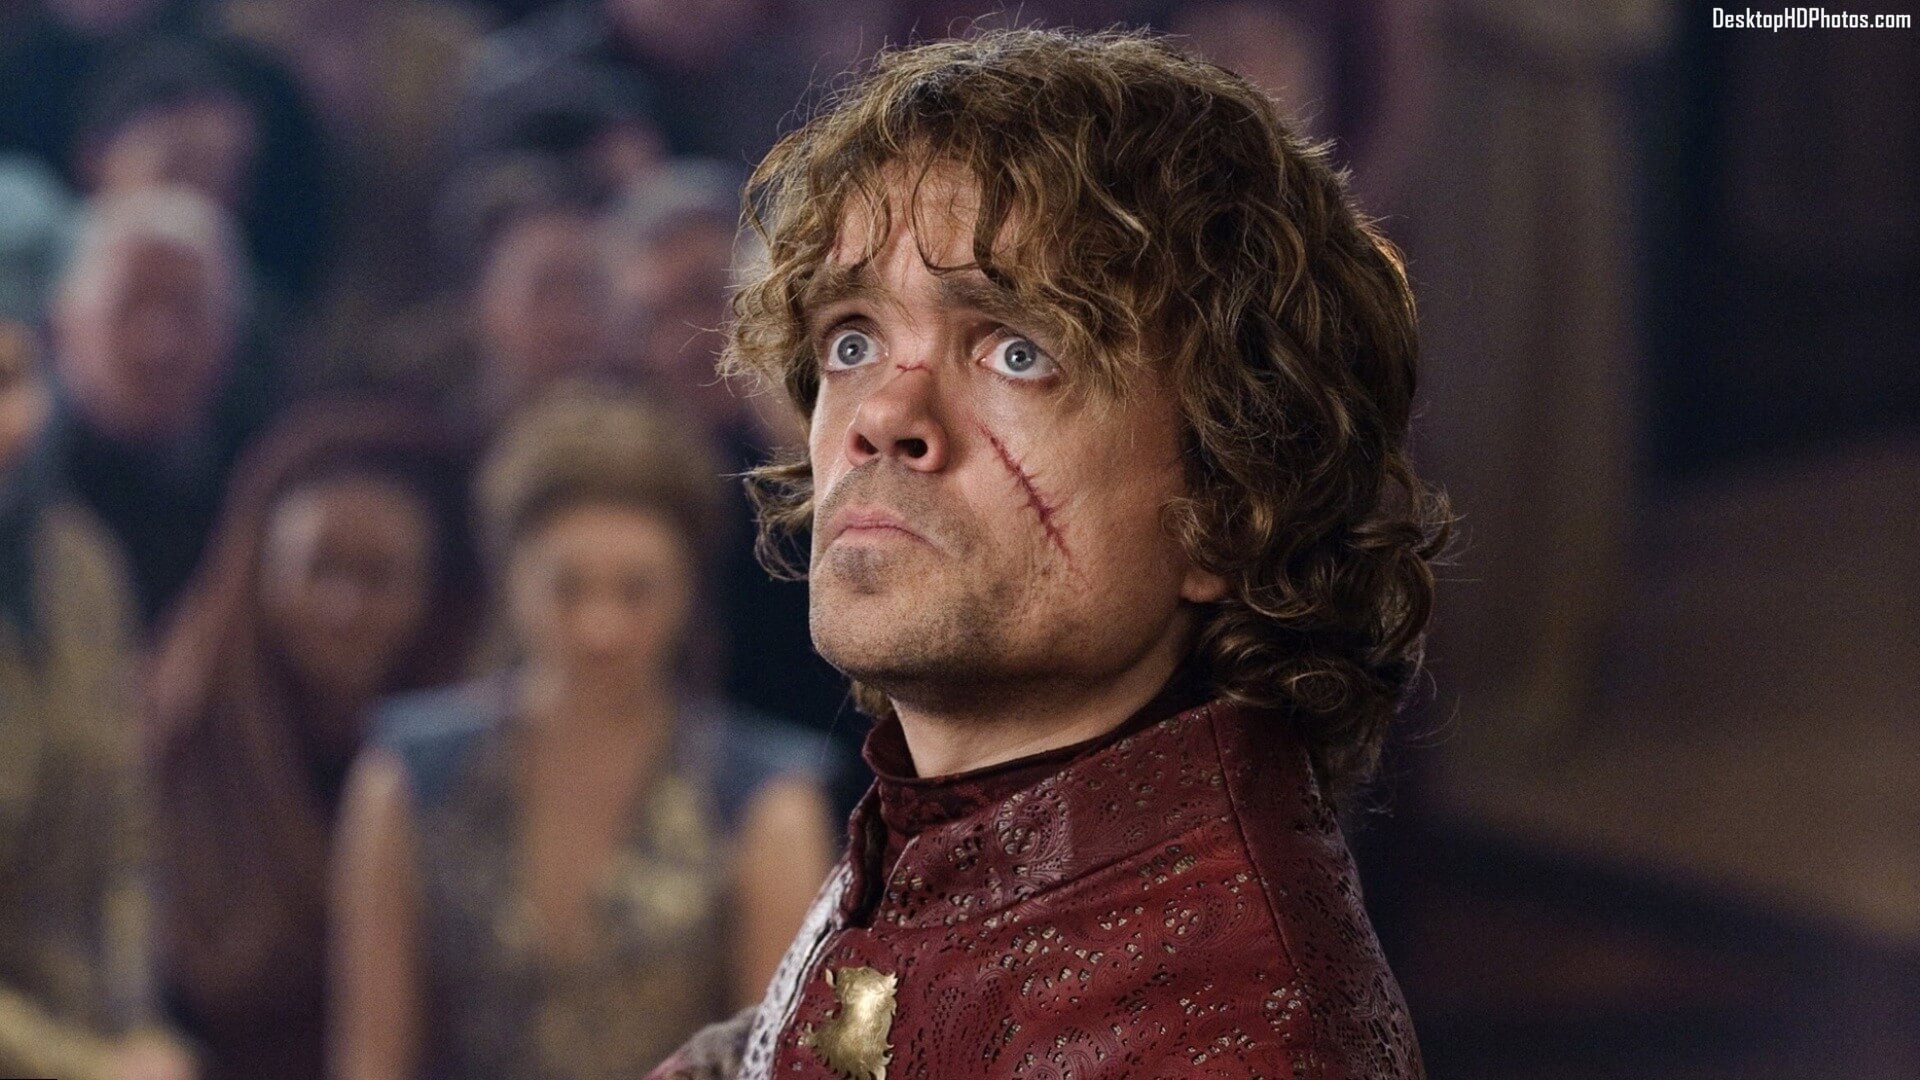 Peter Dinklage to Star in The Toxic Avenger